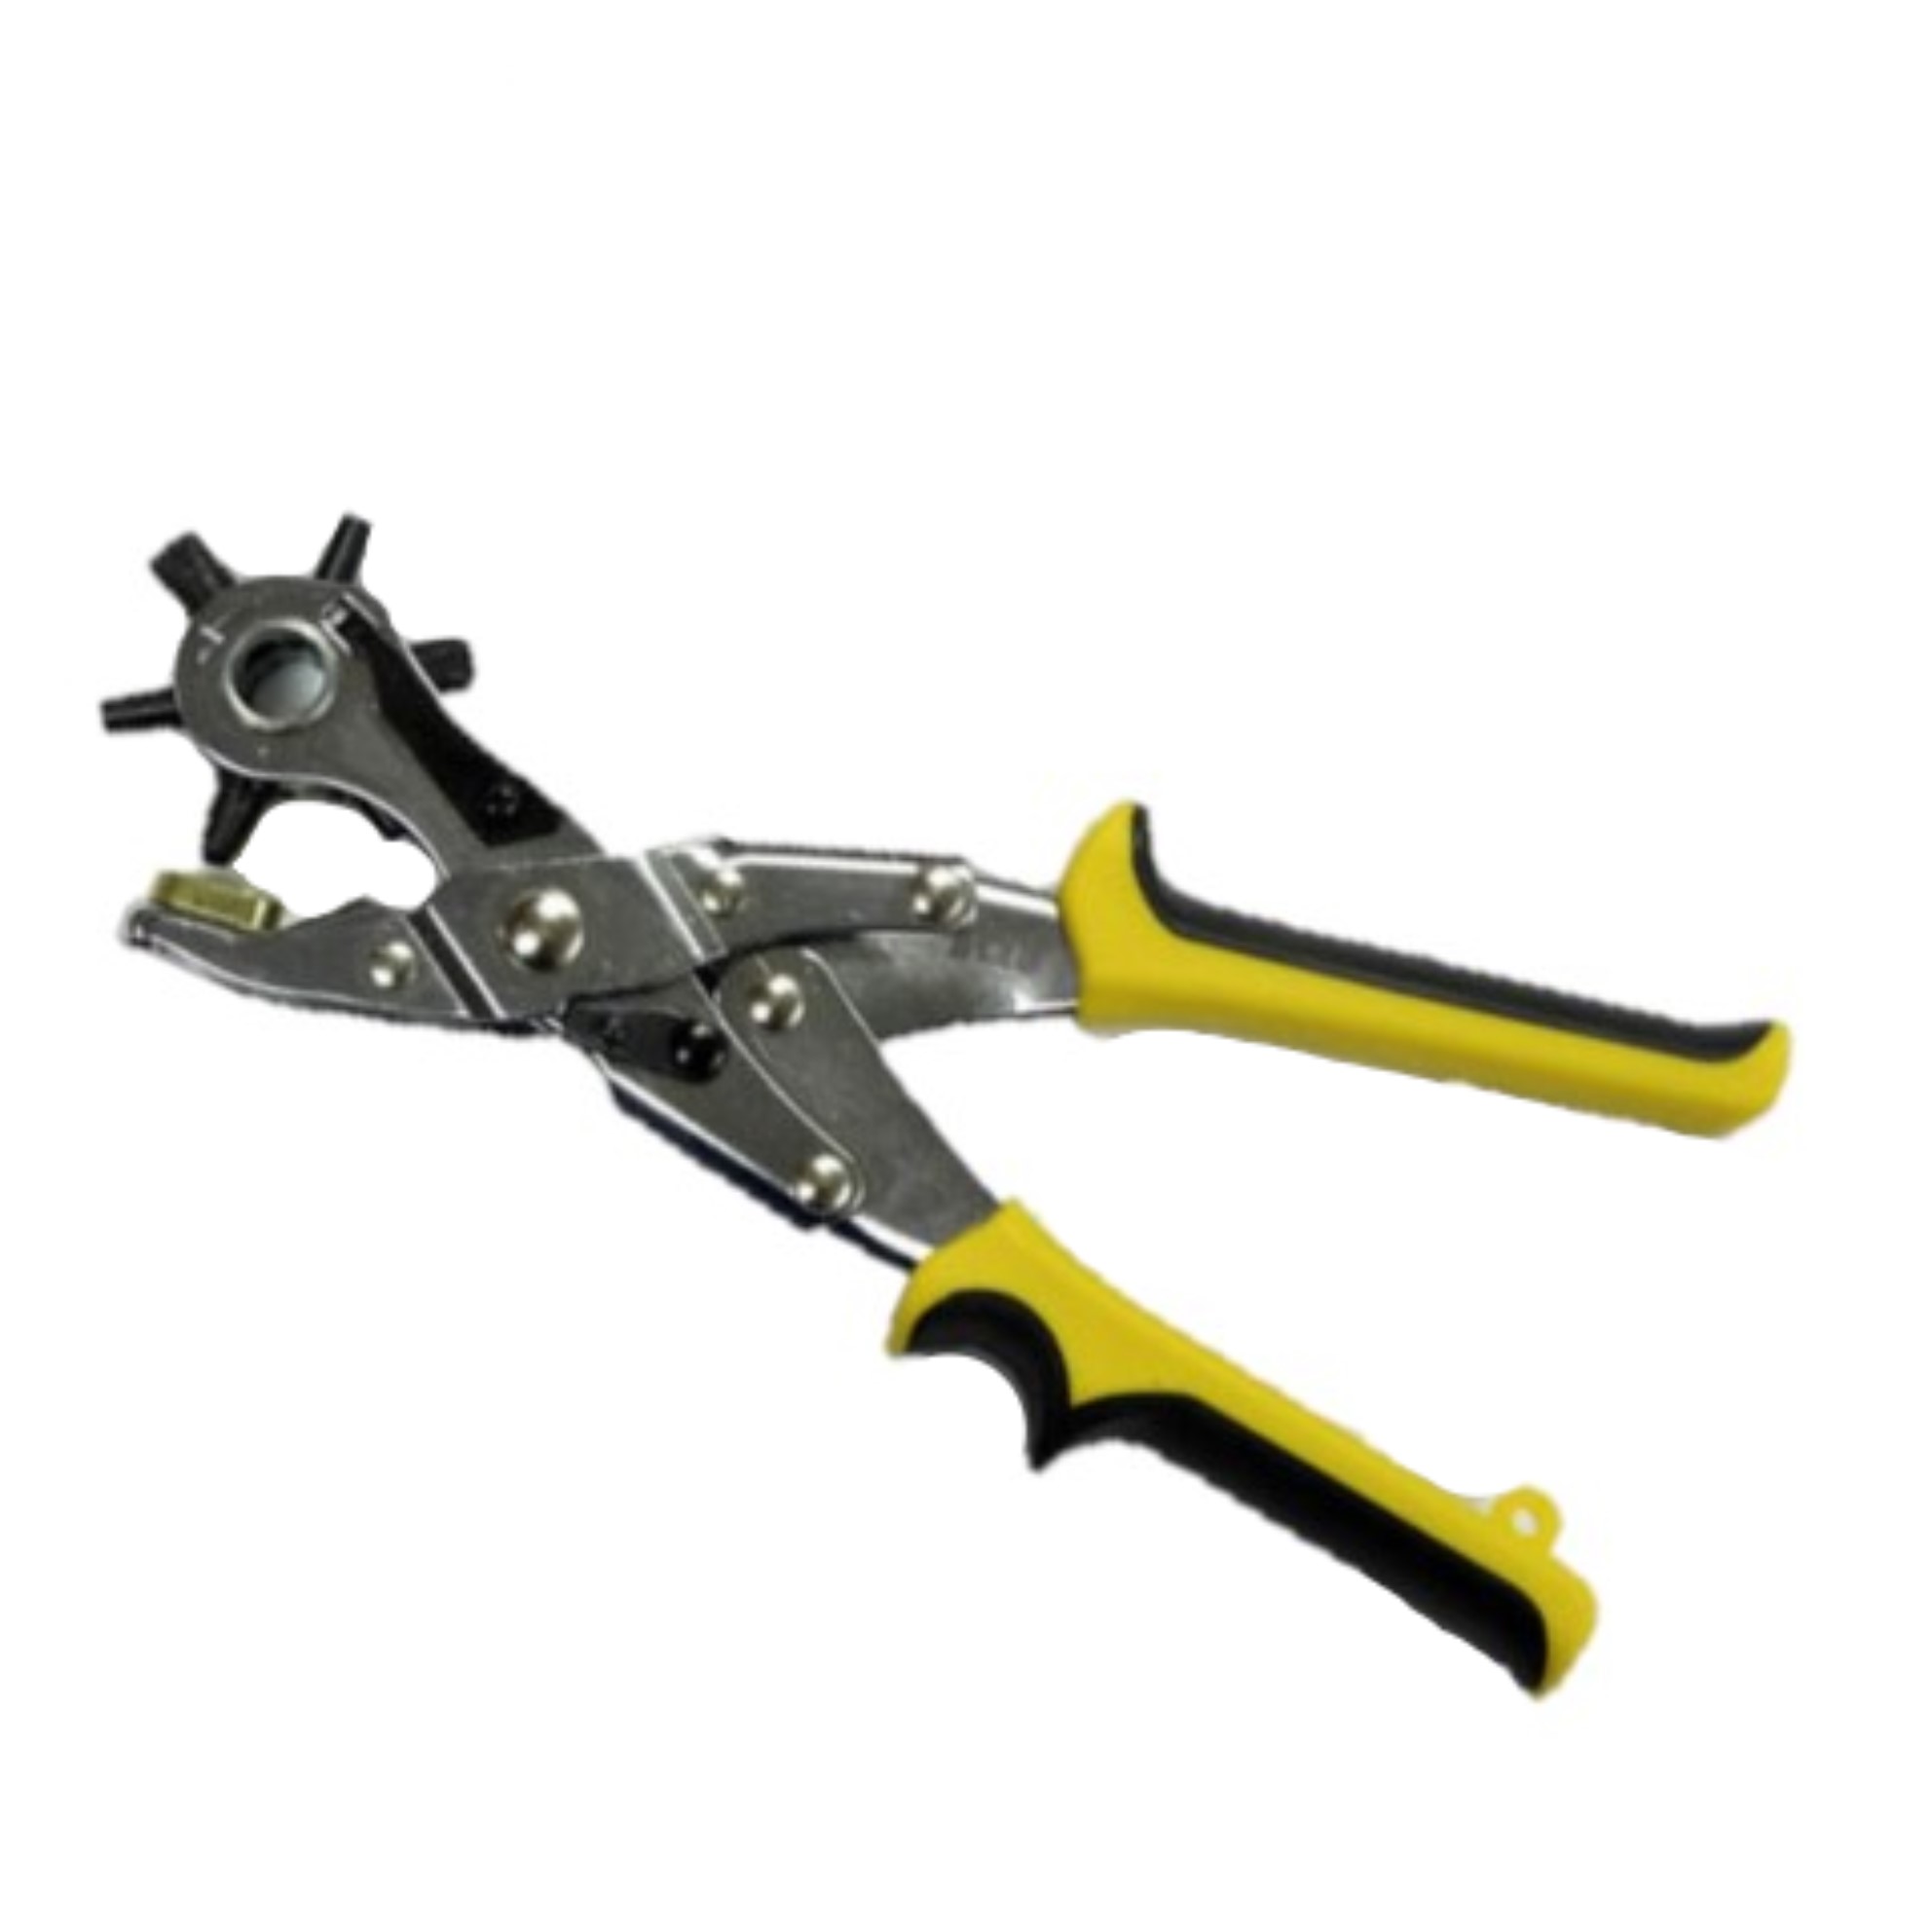 6-1/2 Hole Punching Pliers with Different Sizes 0.8mm-2mm Round